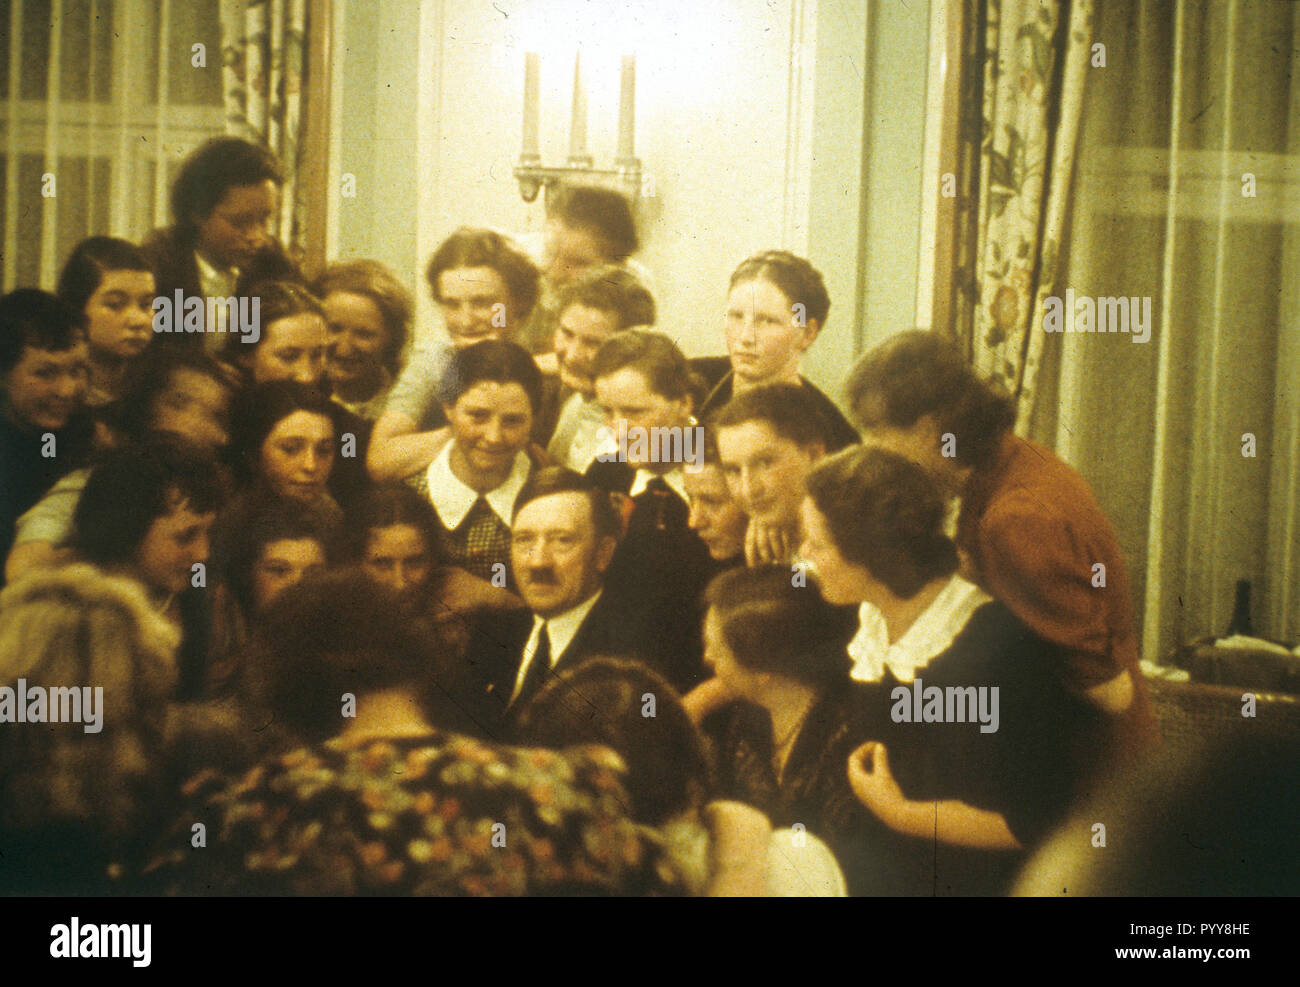 ADOLF HITLER (1889-1945) German Nazi Party leader with admirers about 1938 Stock Photo